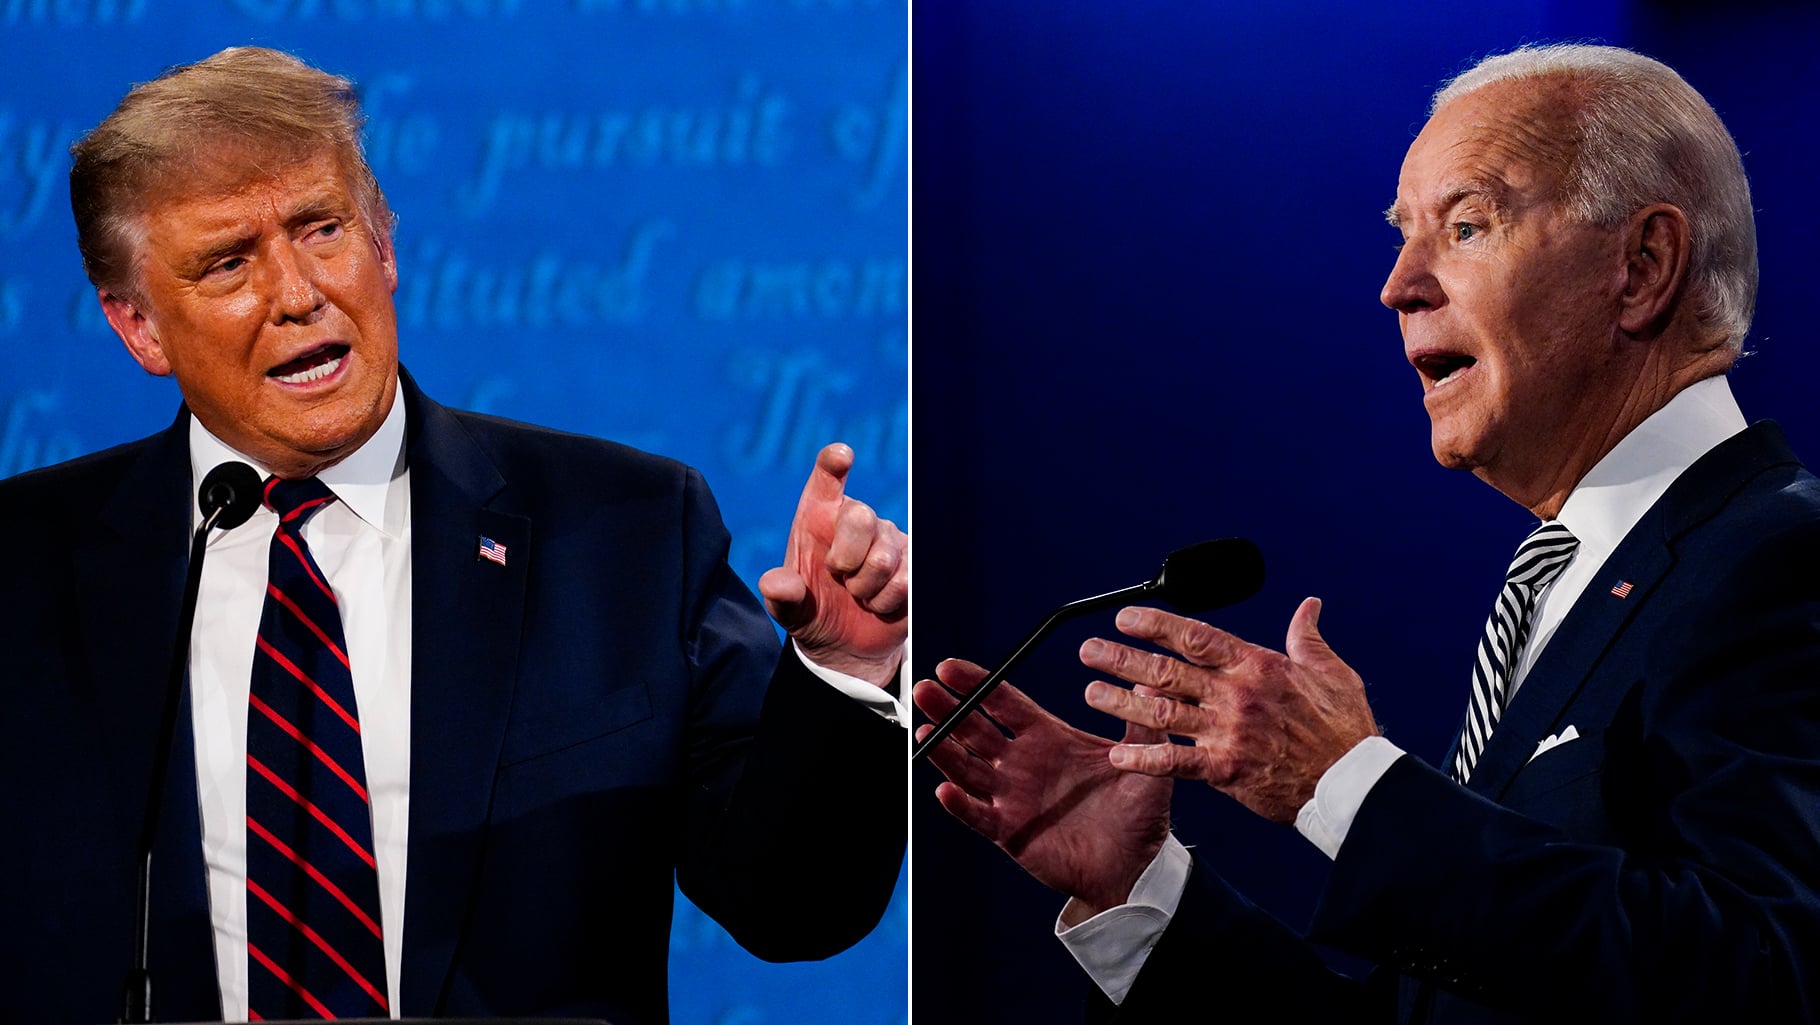 CLEVELAND, OH - SEPTEMBER 29: President Donald Trump speaks during the first presidential debate with former Vice President Joe Biden at Case Western Reserve University in Cleveland, Ohio on Tuesday, Sept. 29, 2020. (Photo by Melina Mara/The Washington Post via Getty Images)CLEVELAND, OH - SEPTEMBER 29: Former Vice President Joe Biden speaks during the first presidential debate with President Donald Trump at Case Western Reserve University in Cleveland, Ohio on Tuesday, Sept. 29, 2020. (Photo by Melina Mara/The Washington Post via Getty Images)